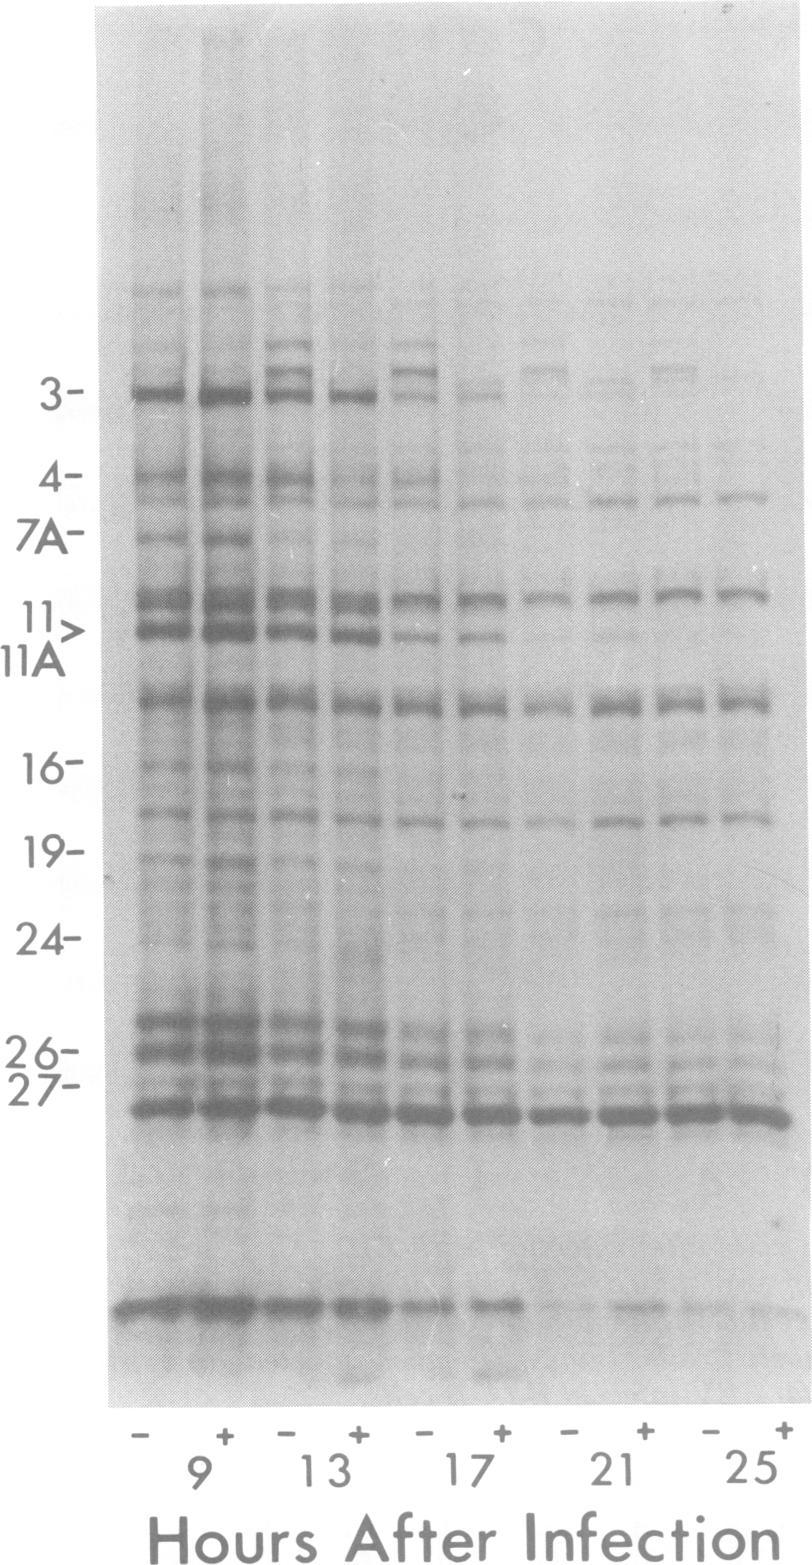 654 NOTES 3-4- 7A- 11> lla 19-24- 26-27- 9 13 17 21 25 Hours After Infection FIG. 2. Time course of appearance of virus-induced proteins in superinfected Raji cells in the presence (+) and absence (-) of 100 plm acyclovir.